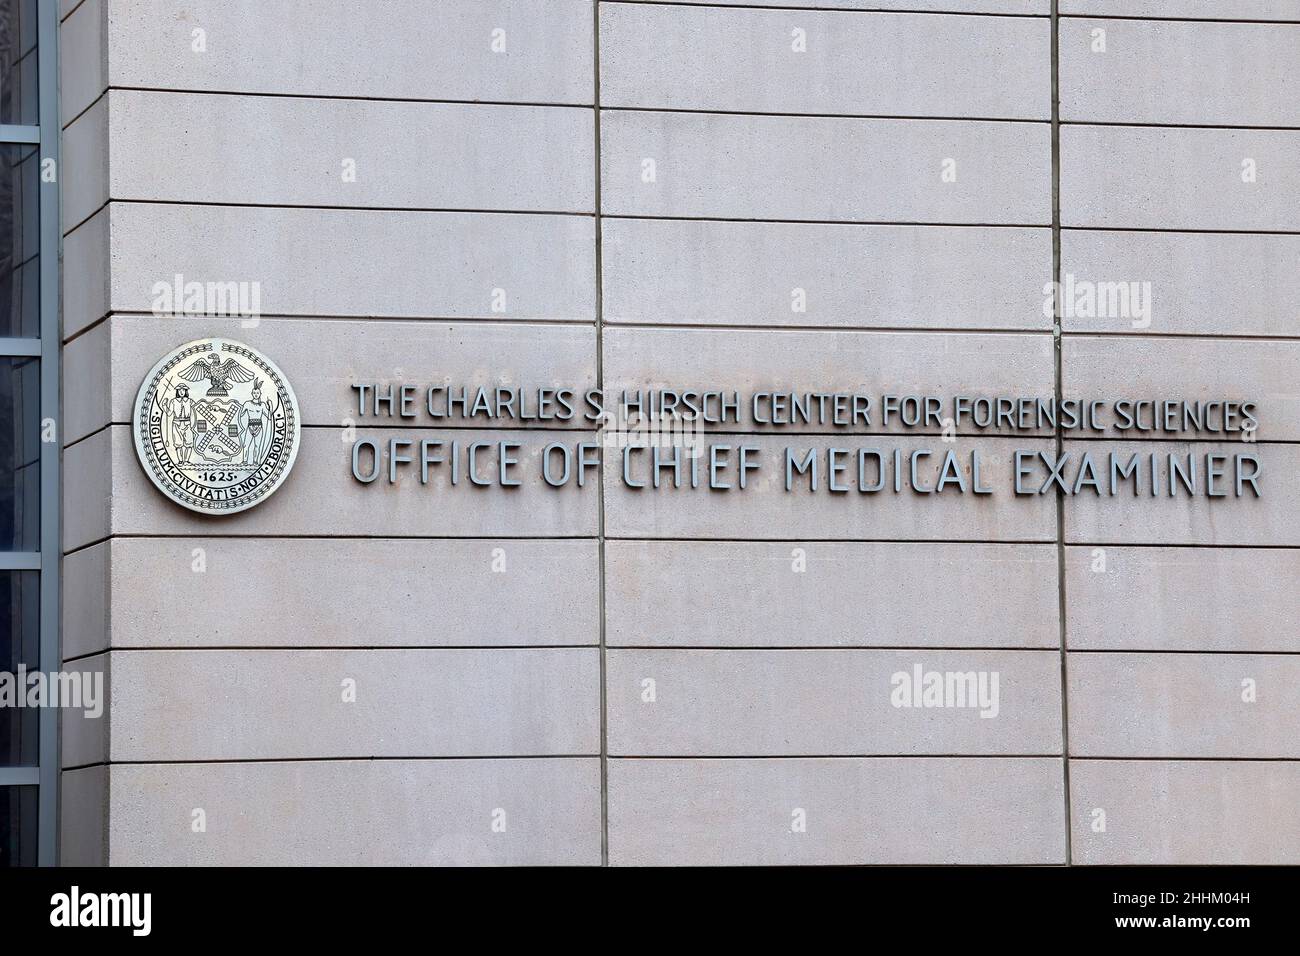 NYC Office of Chief Medical Examiner, 421 E 26th St, New York, NY. the Charles S. Hirsch Center for Forensic Sciences in Manhattan. Stock Photo